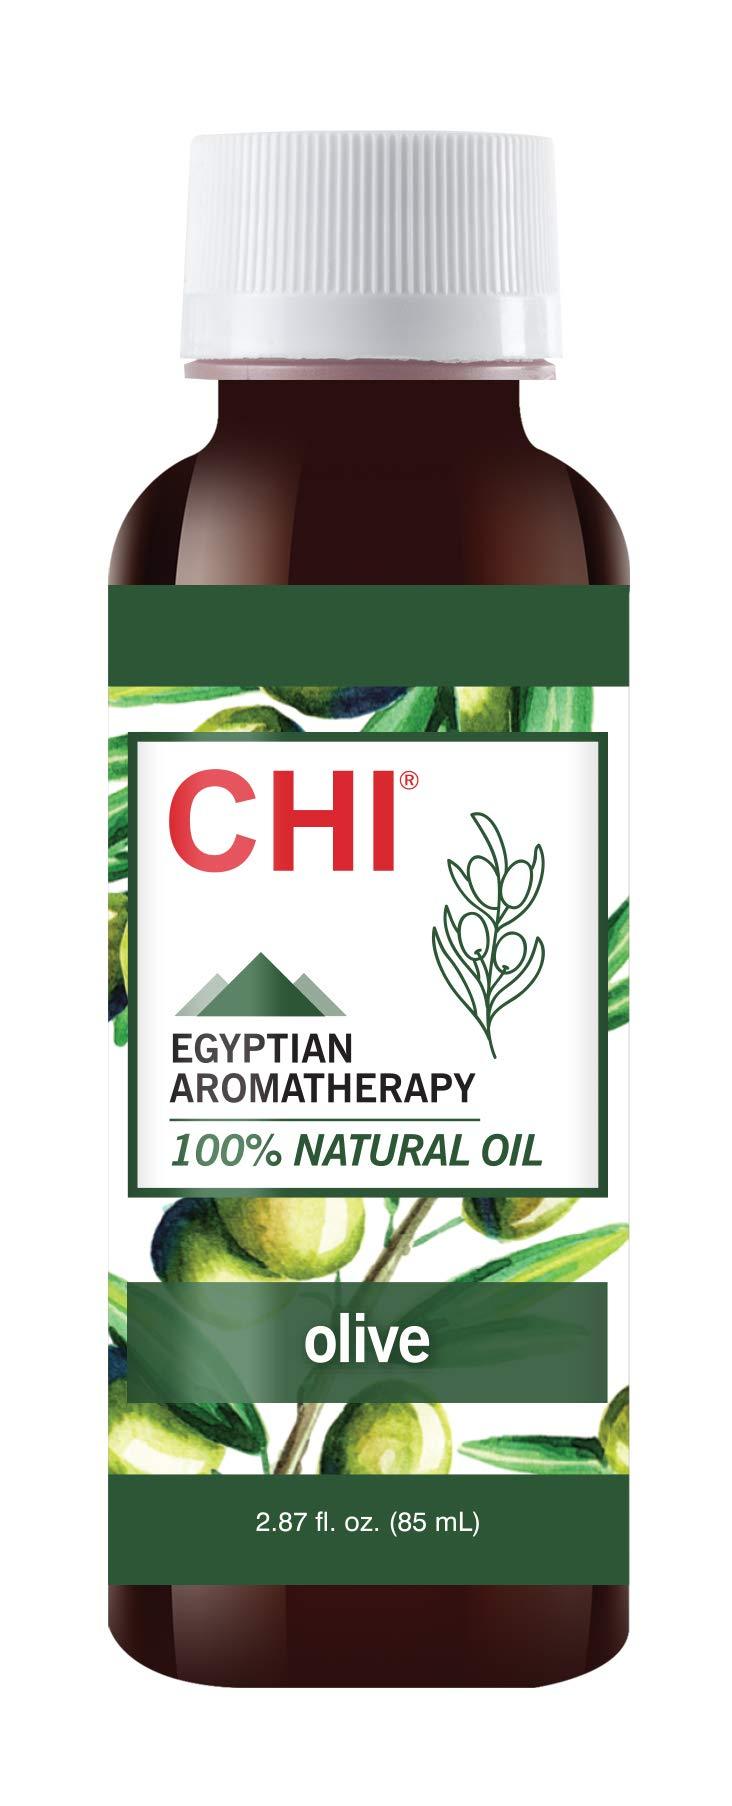 CHI Egyptian Aromatherapy 100% Natural Olive Oil, Massage Therapy, Carrier Oils, Fixed Oils, 2.87 Fl Oz - BeesActive Australia